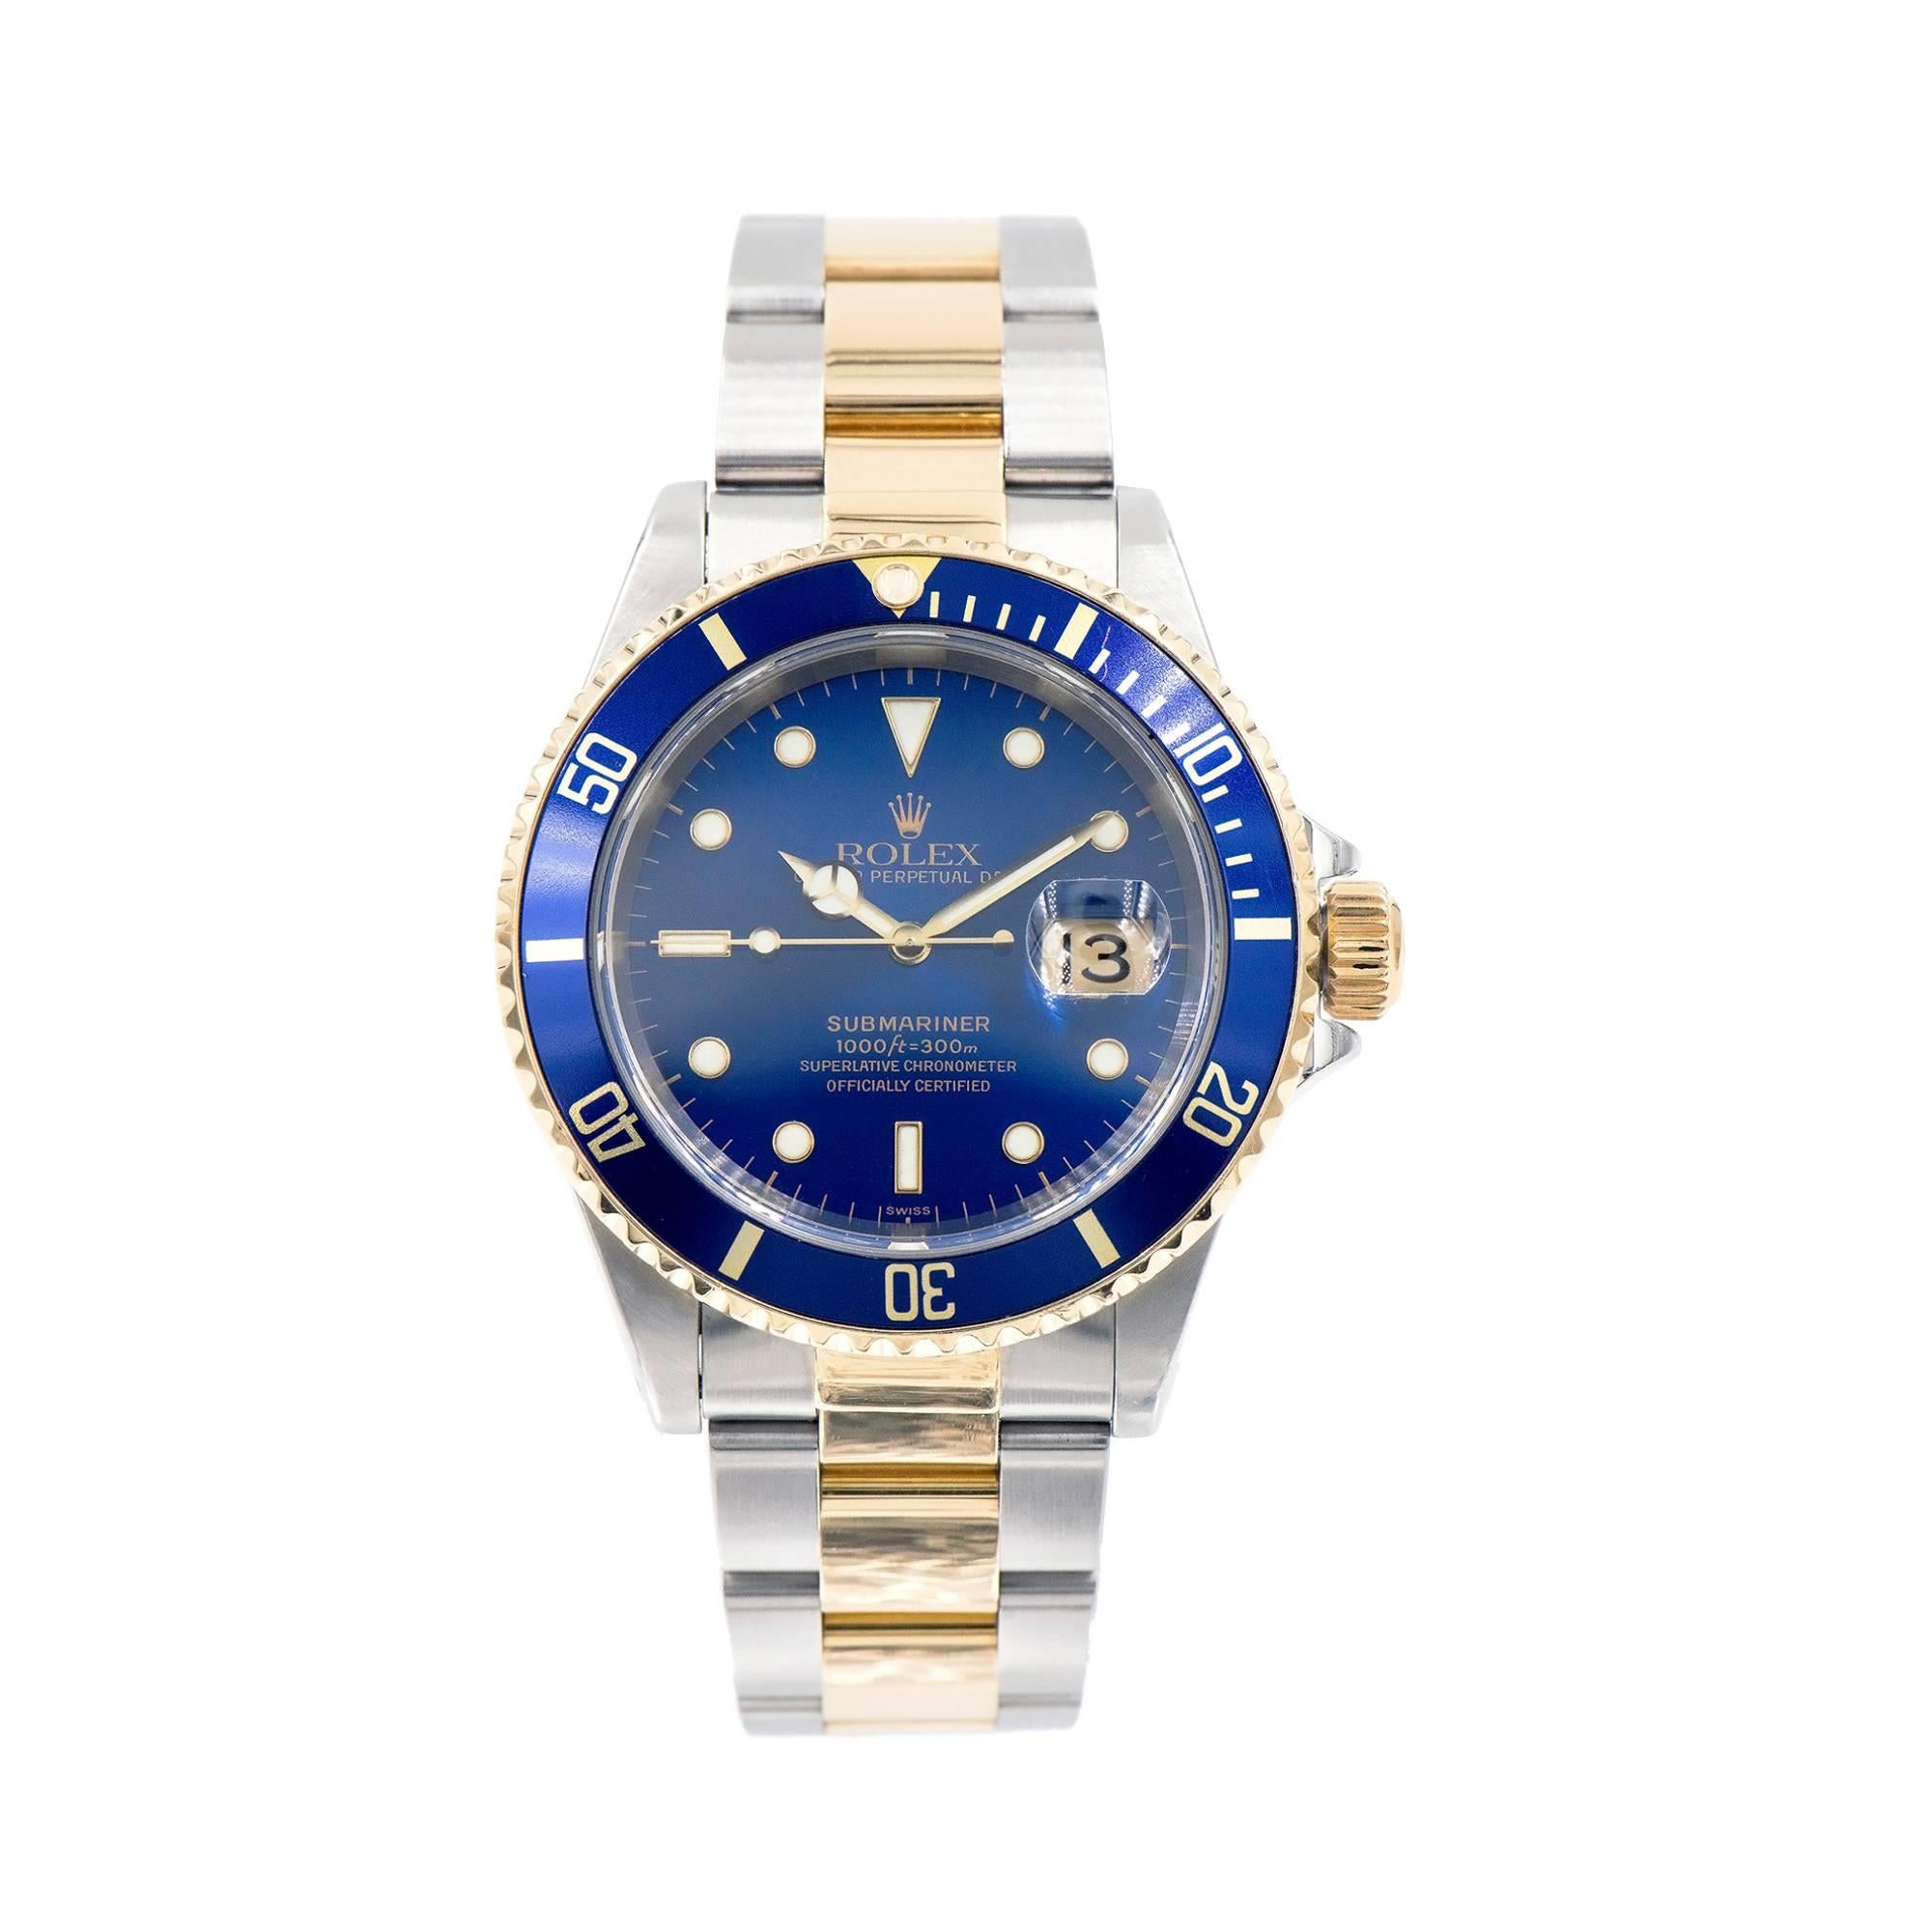 Original Rolex Submariner 18k yellow gold and stainless steel Oyster Perpetual date watch. Blue dial and bezel rim. Circa 2000, Ref 16613. 

Length: 47mm 
Width: 38mm 
Band width at case: 20mm 
Case thickness: 12.83mm 
Band: 93153-18 x 9 Rolex